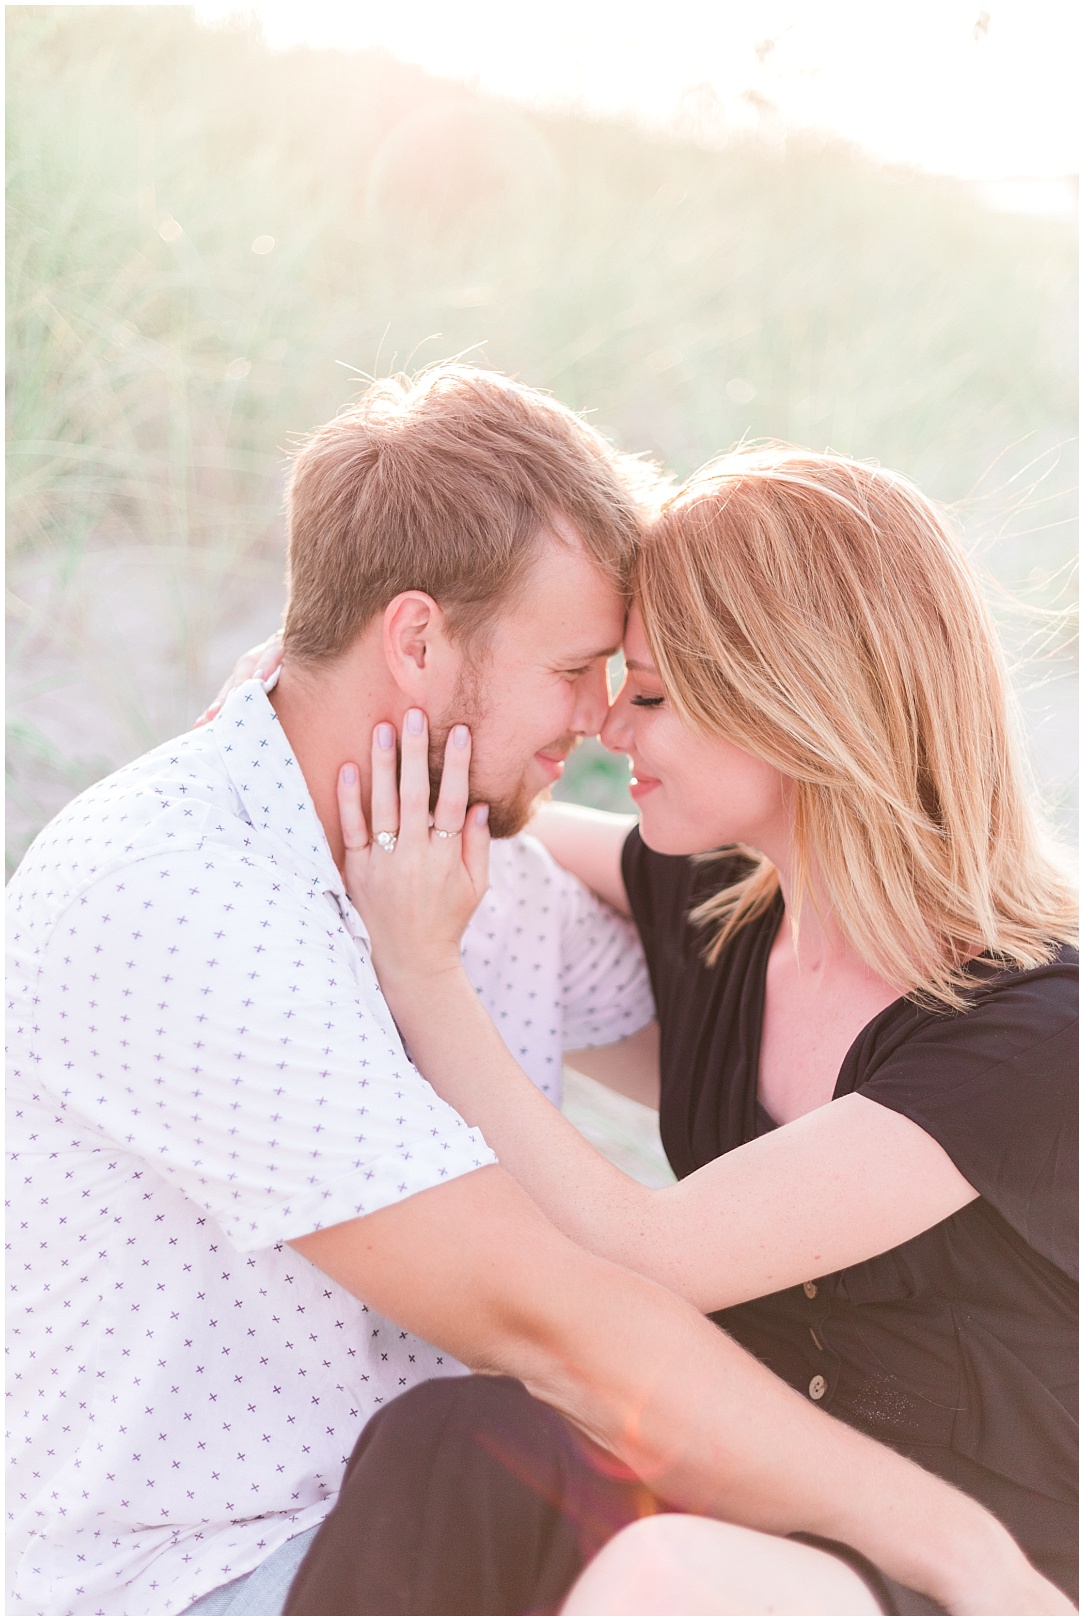 Outerbanks Elopement Photographer